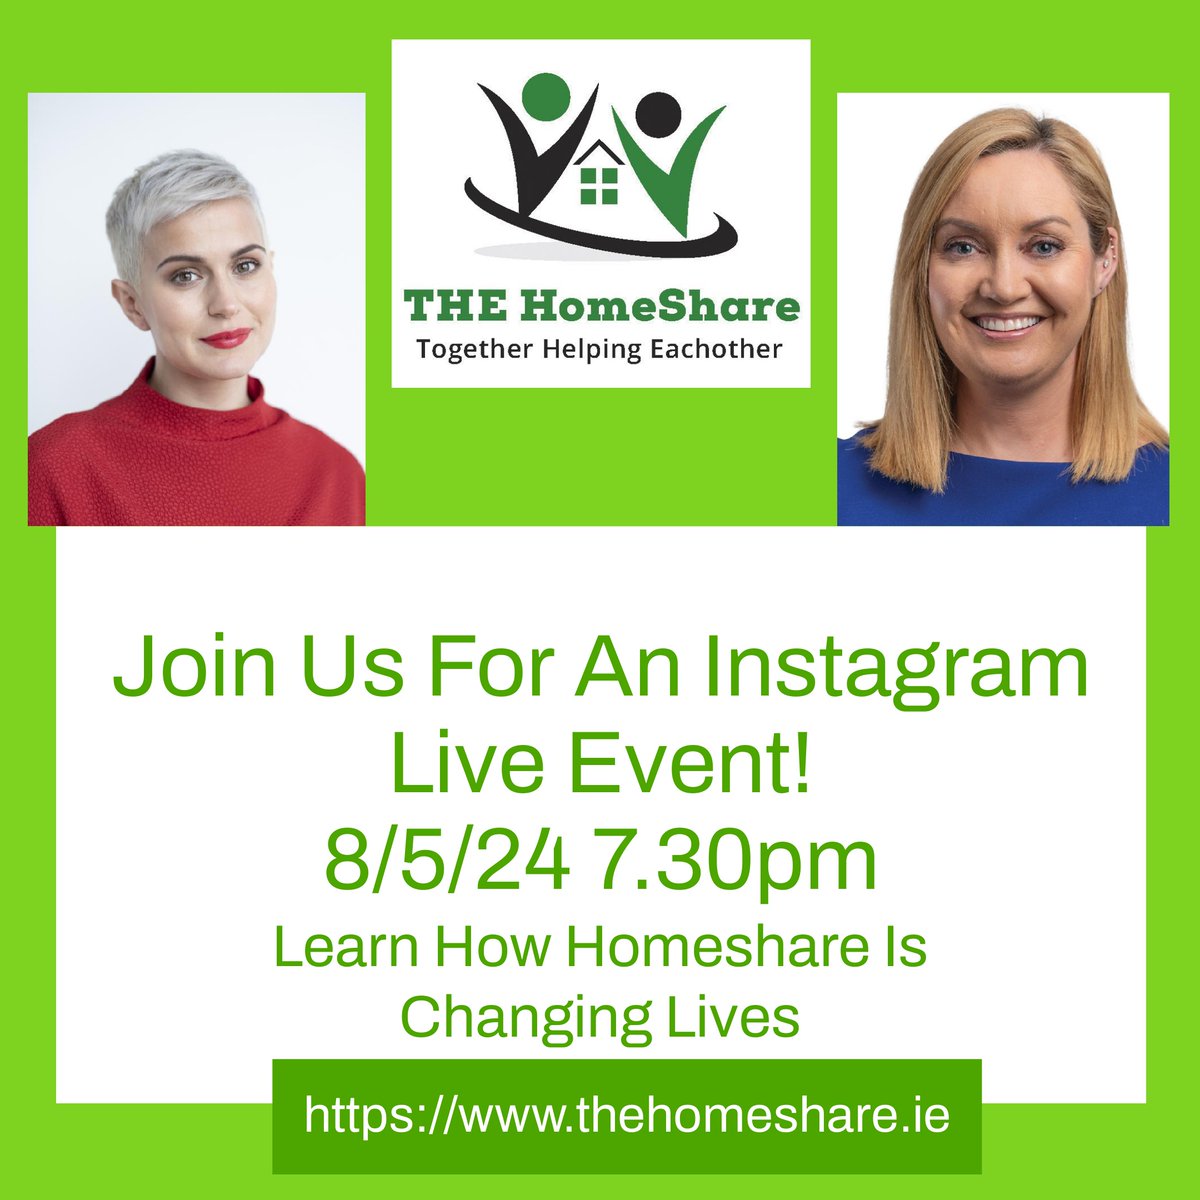 Join us, along with @MariaWalshEU @vickicasserly to discover the positive impact HomeSharing is having on loneliness, health, independence & financial security for both older & younger generations. Stay tuned for more details! #thinkhomeshare #togetherhelpingeachother #nonprofit